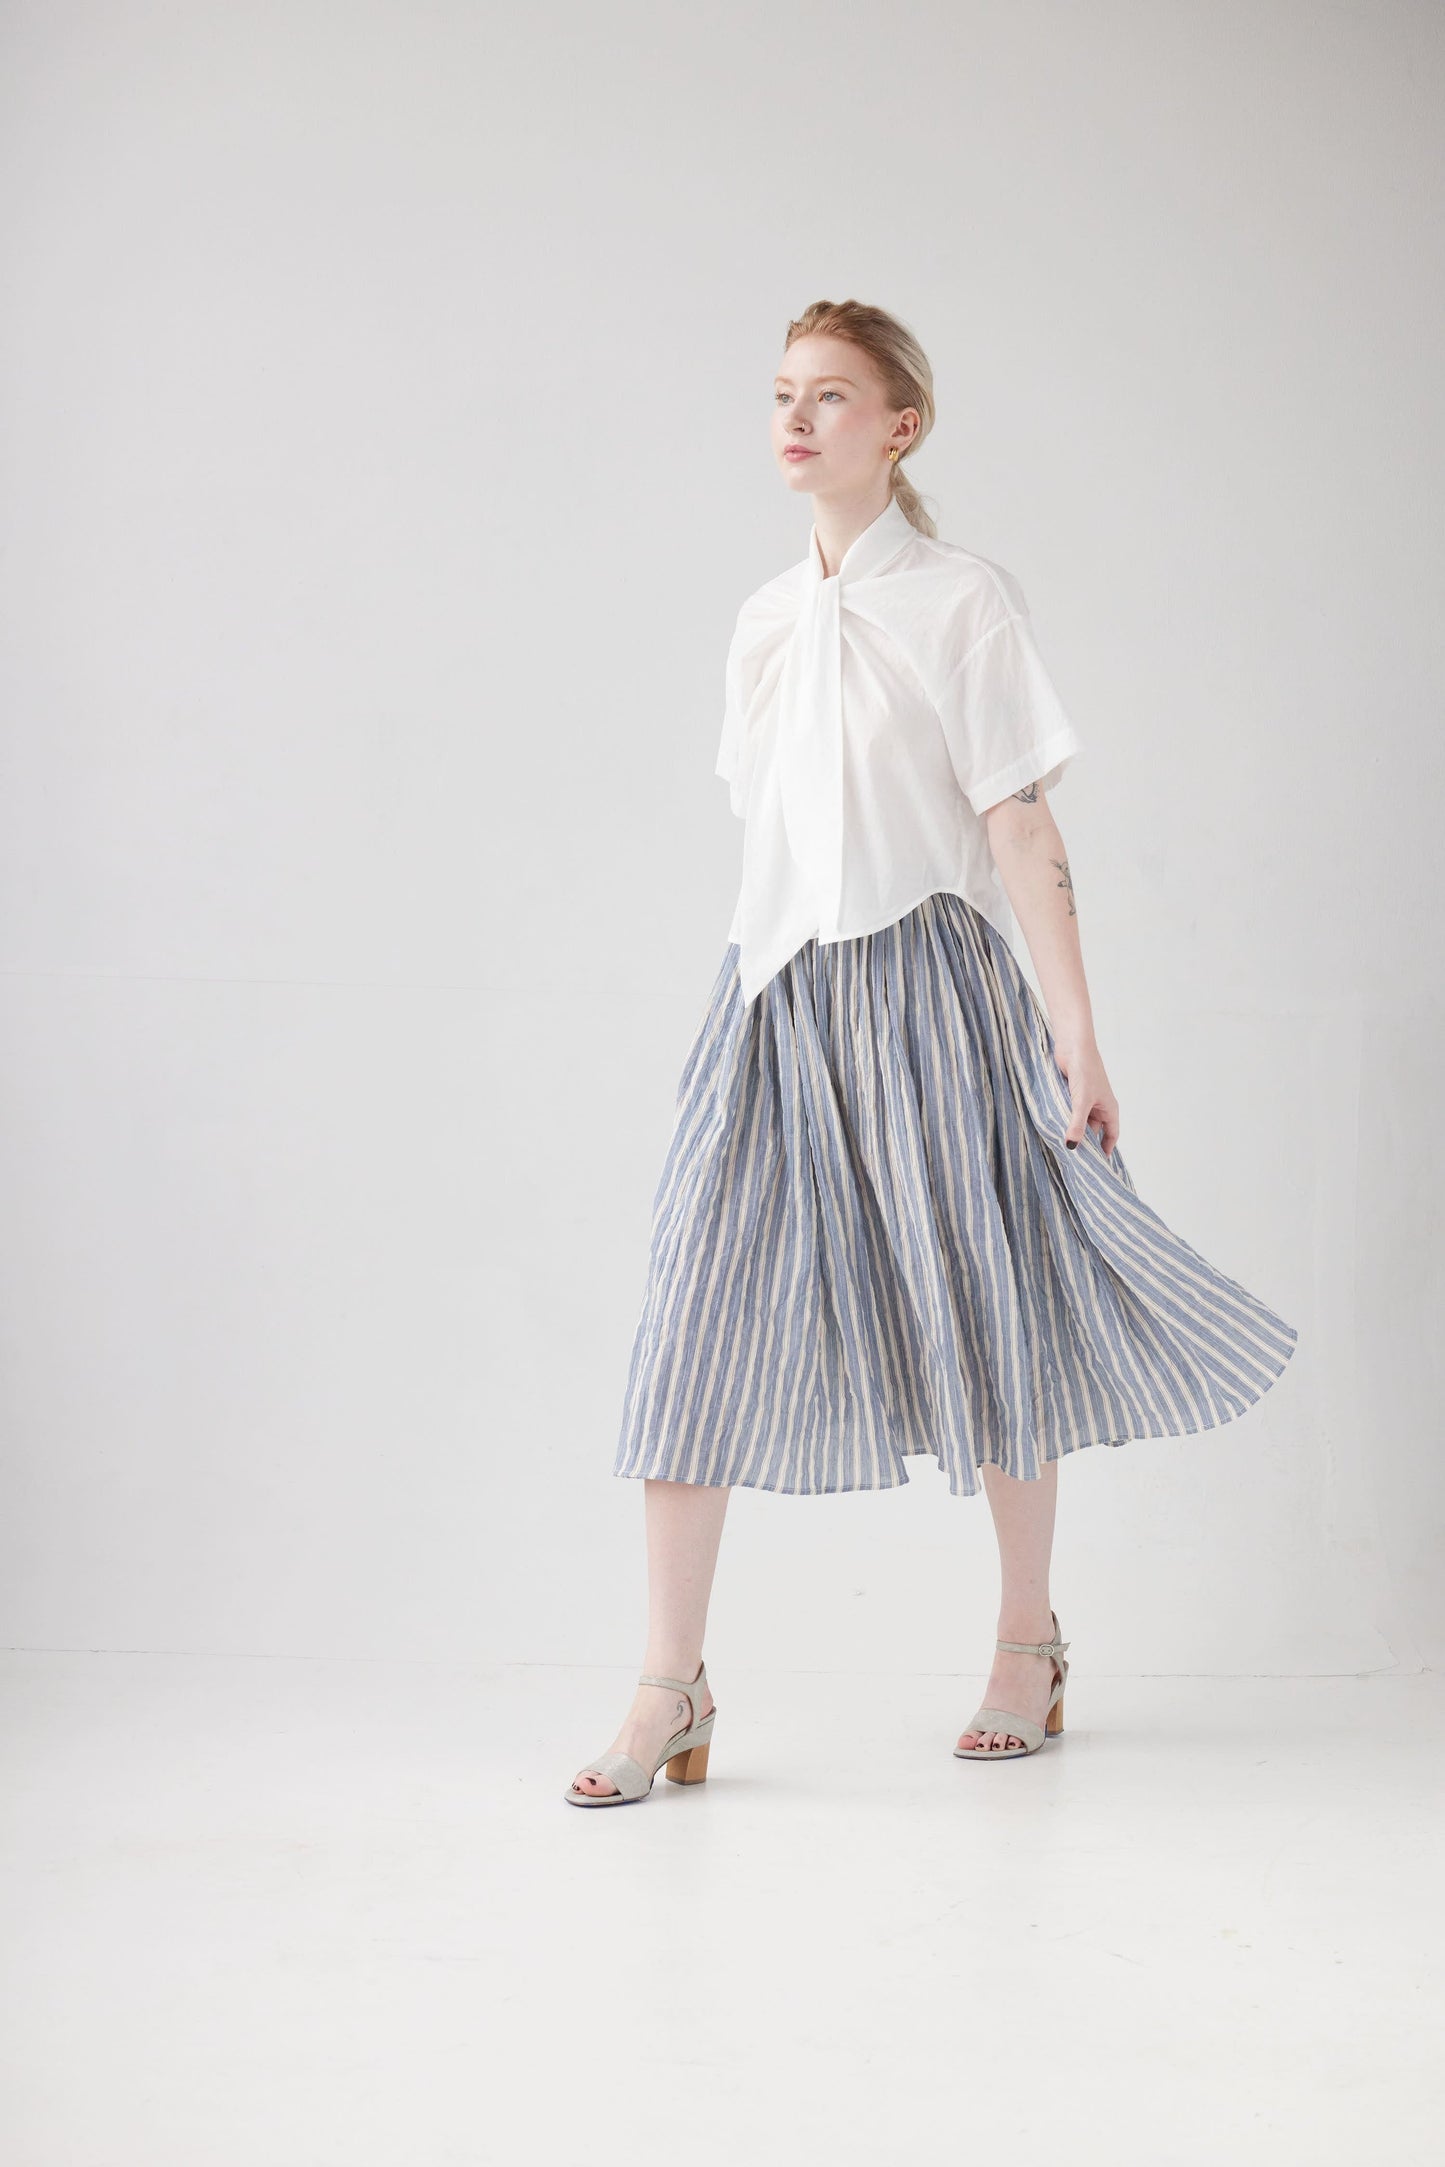 Erica Skirt in Summer Cotton Skirts CHRISTINE ALCALAY Blue Stripe Extra Small / Small 